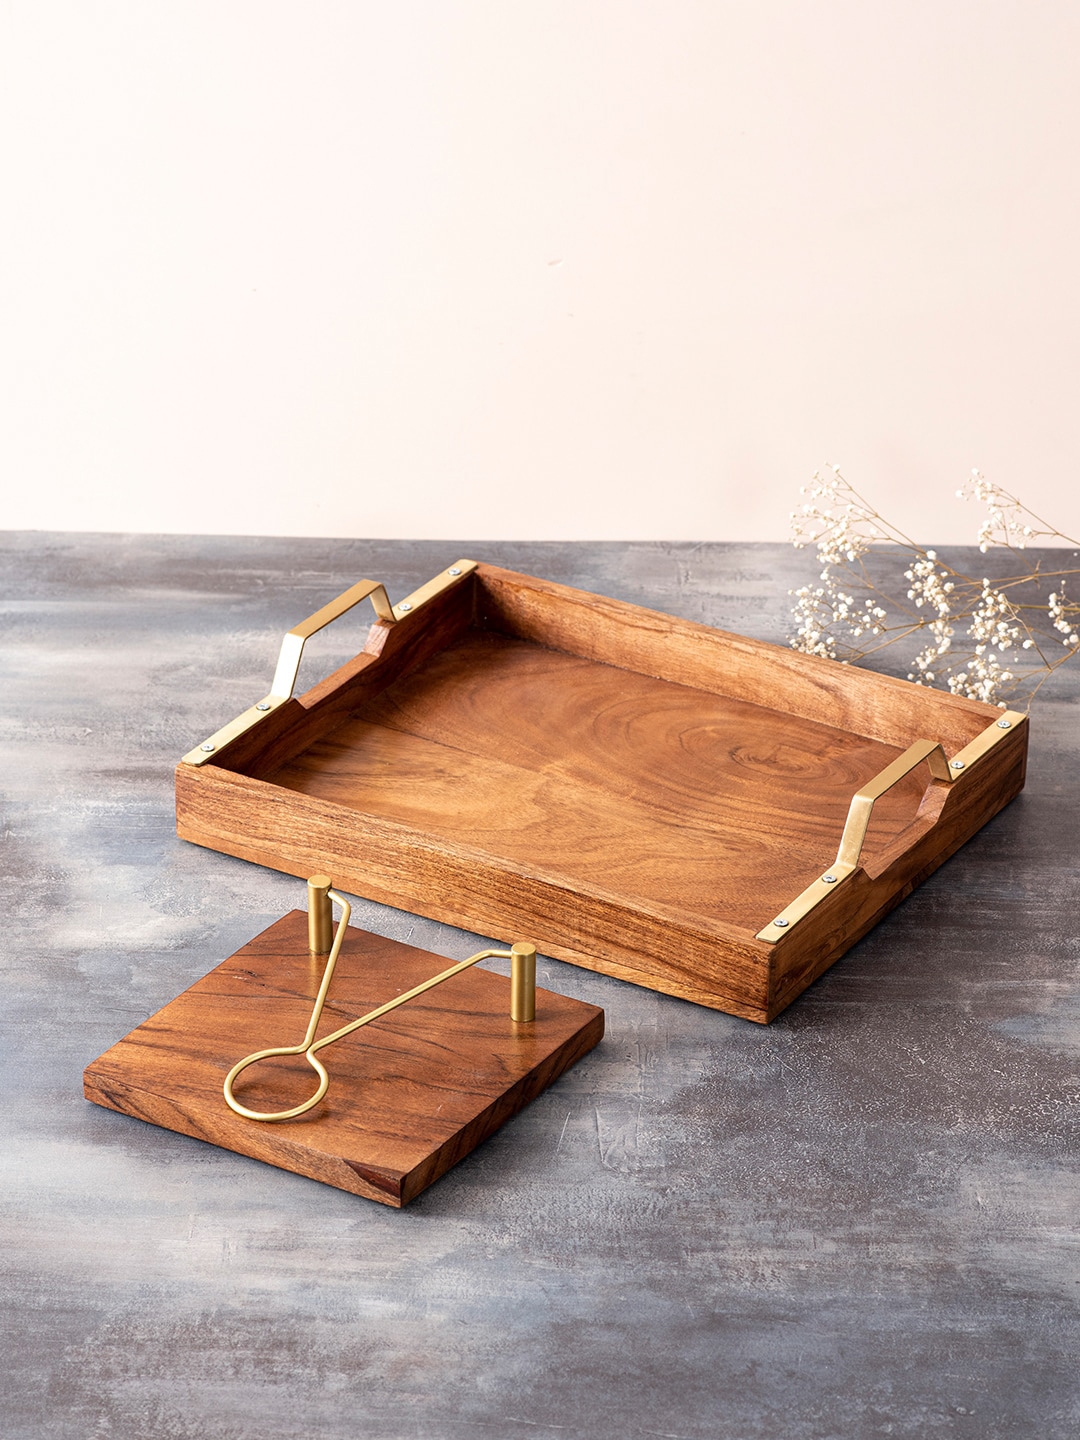 nestroots Brown and Gold Toned Teak Wood Serving Tray & Napkin Holder